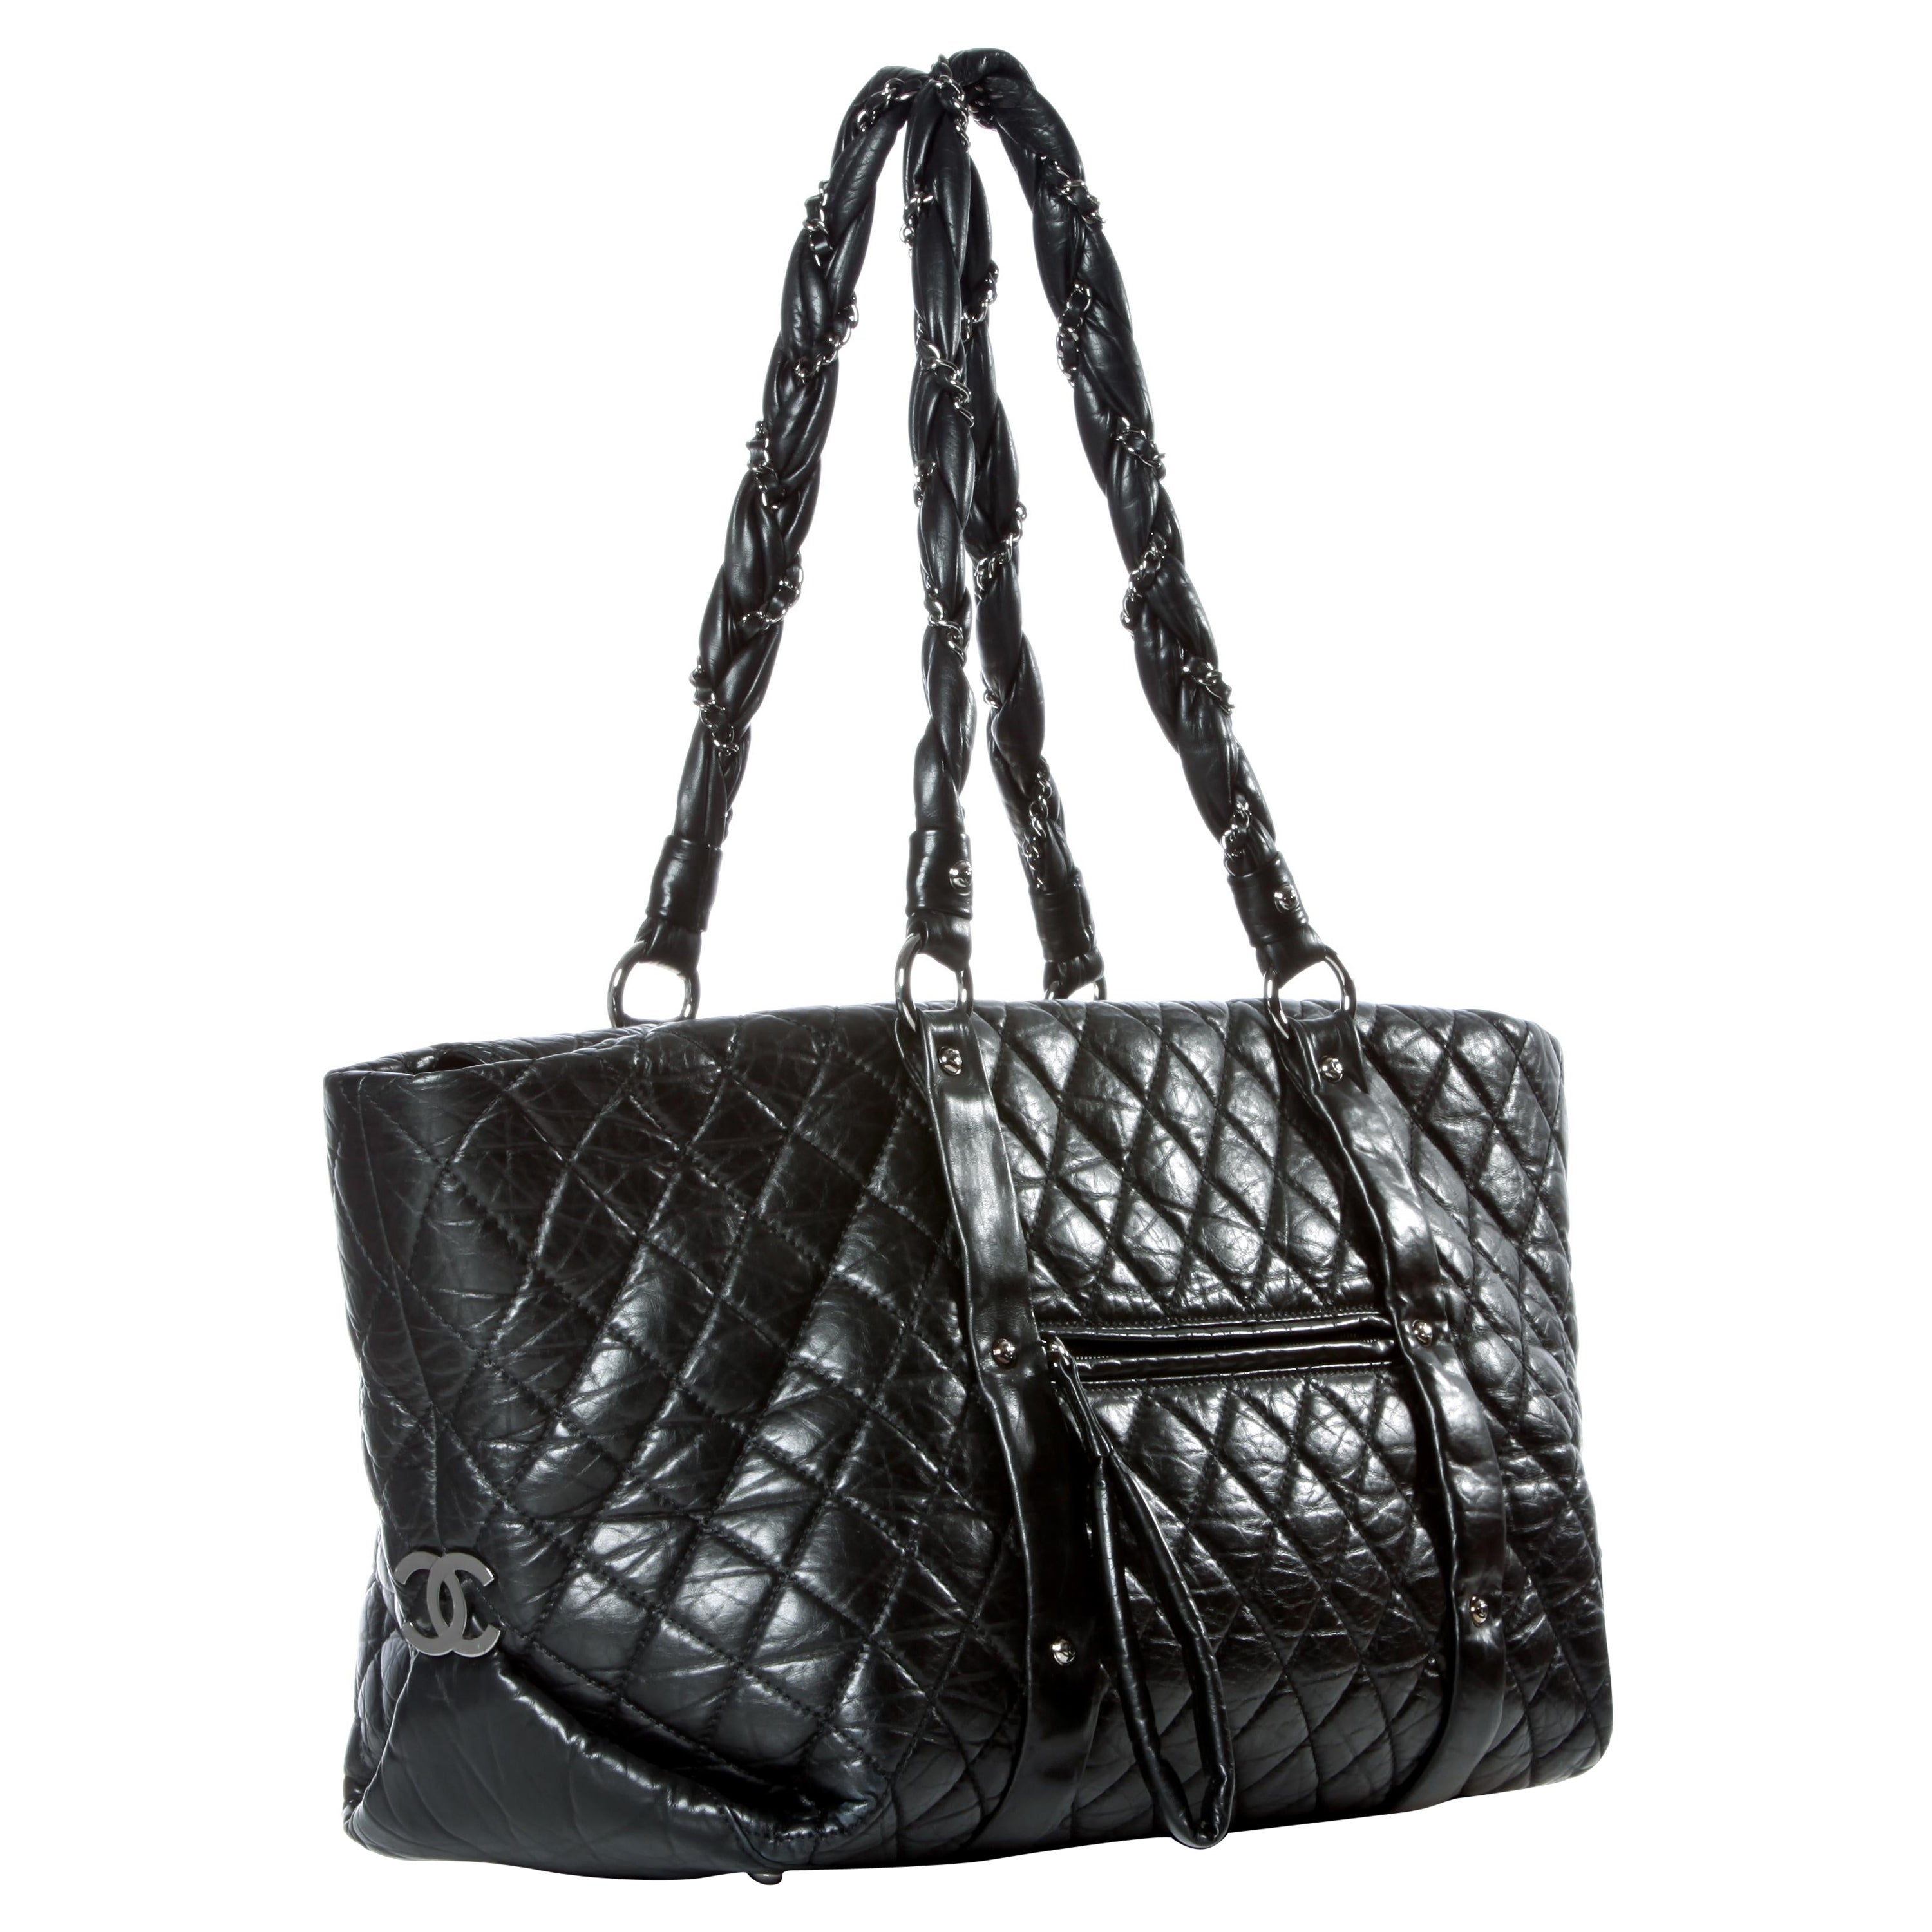 Chanel 2006 Soft Plush Quilted Distressed Leather Large Carry-On Travel Tote Bag For Sale